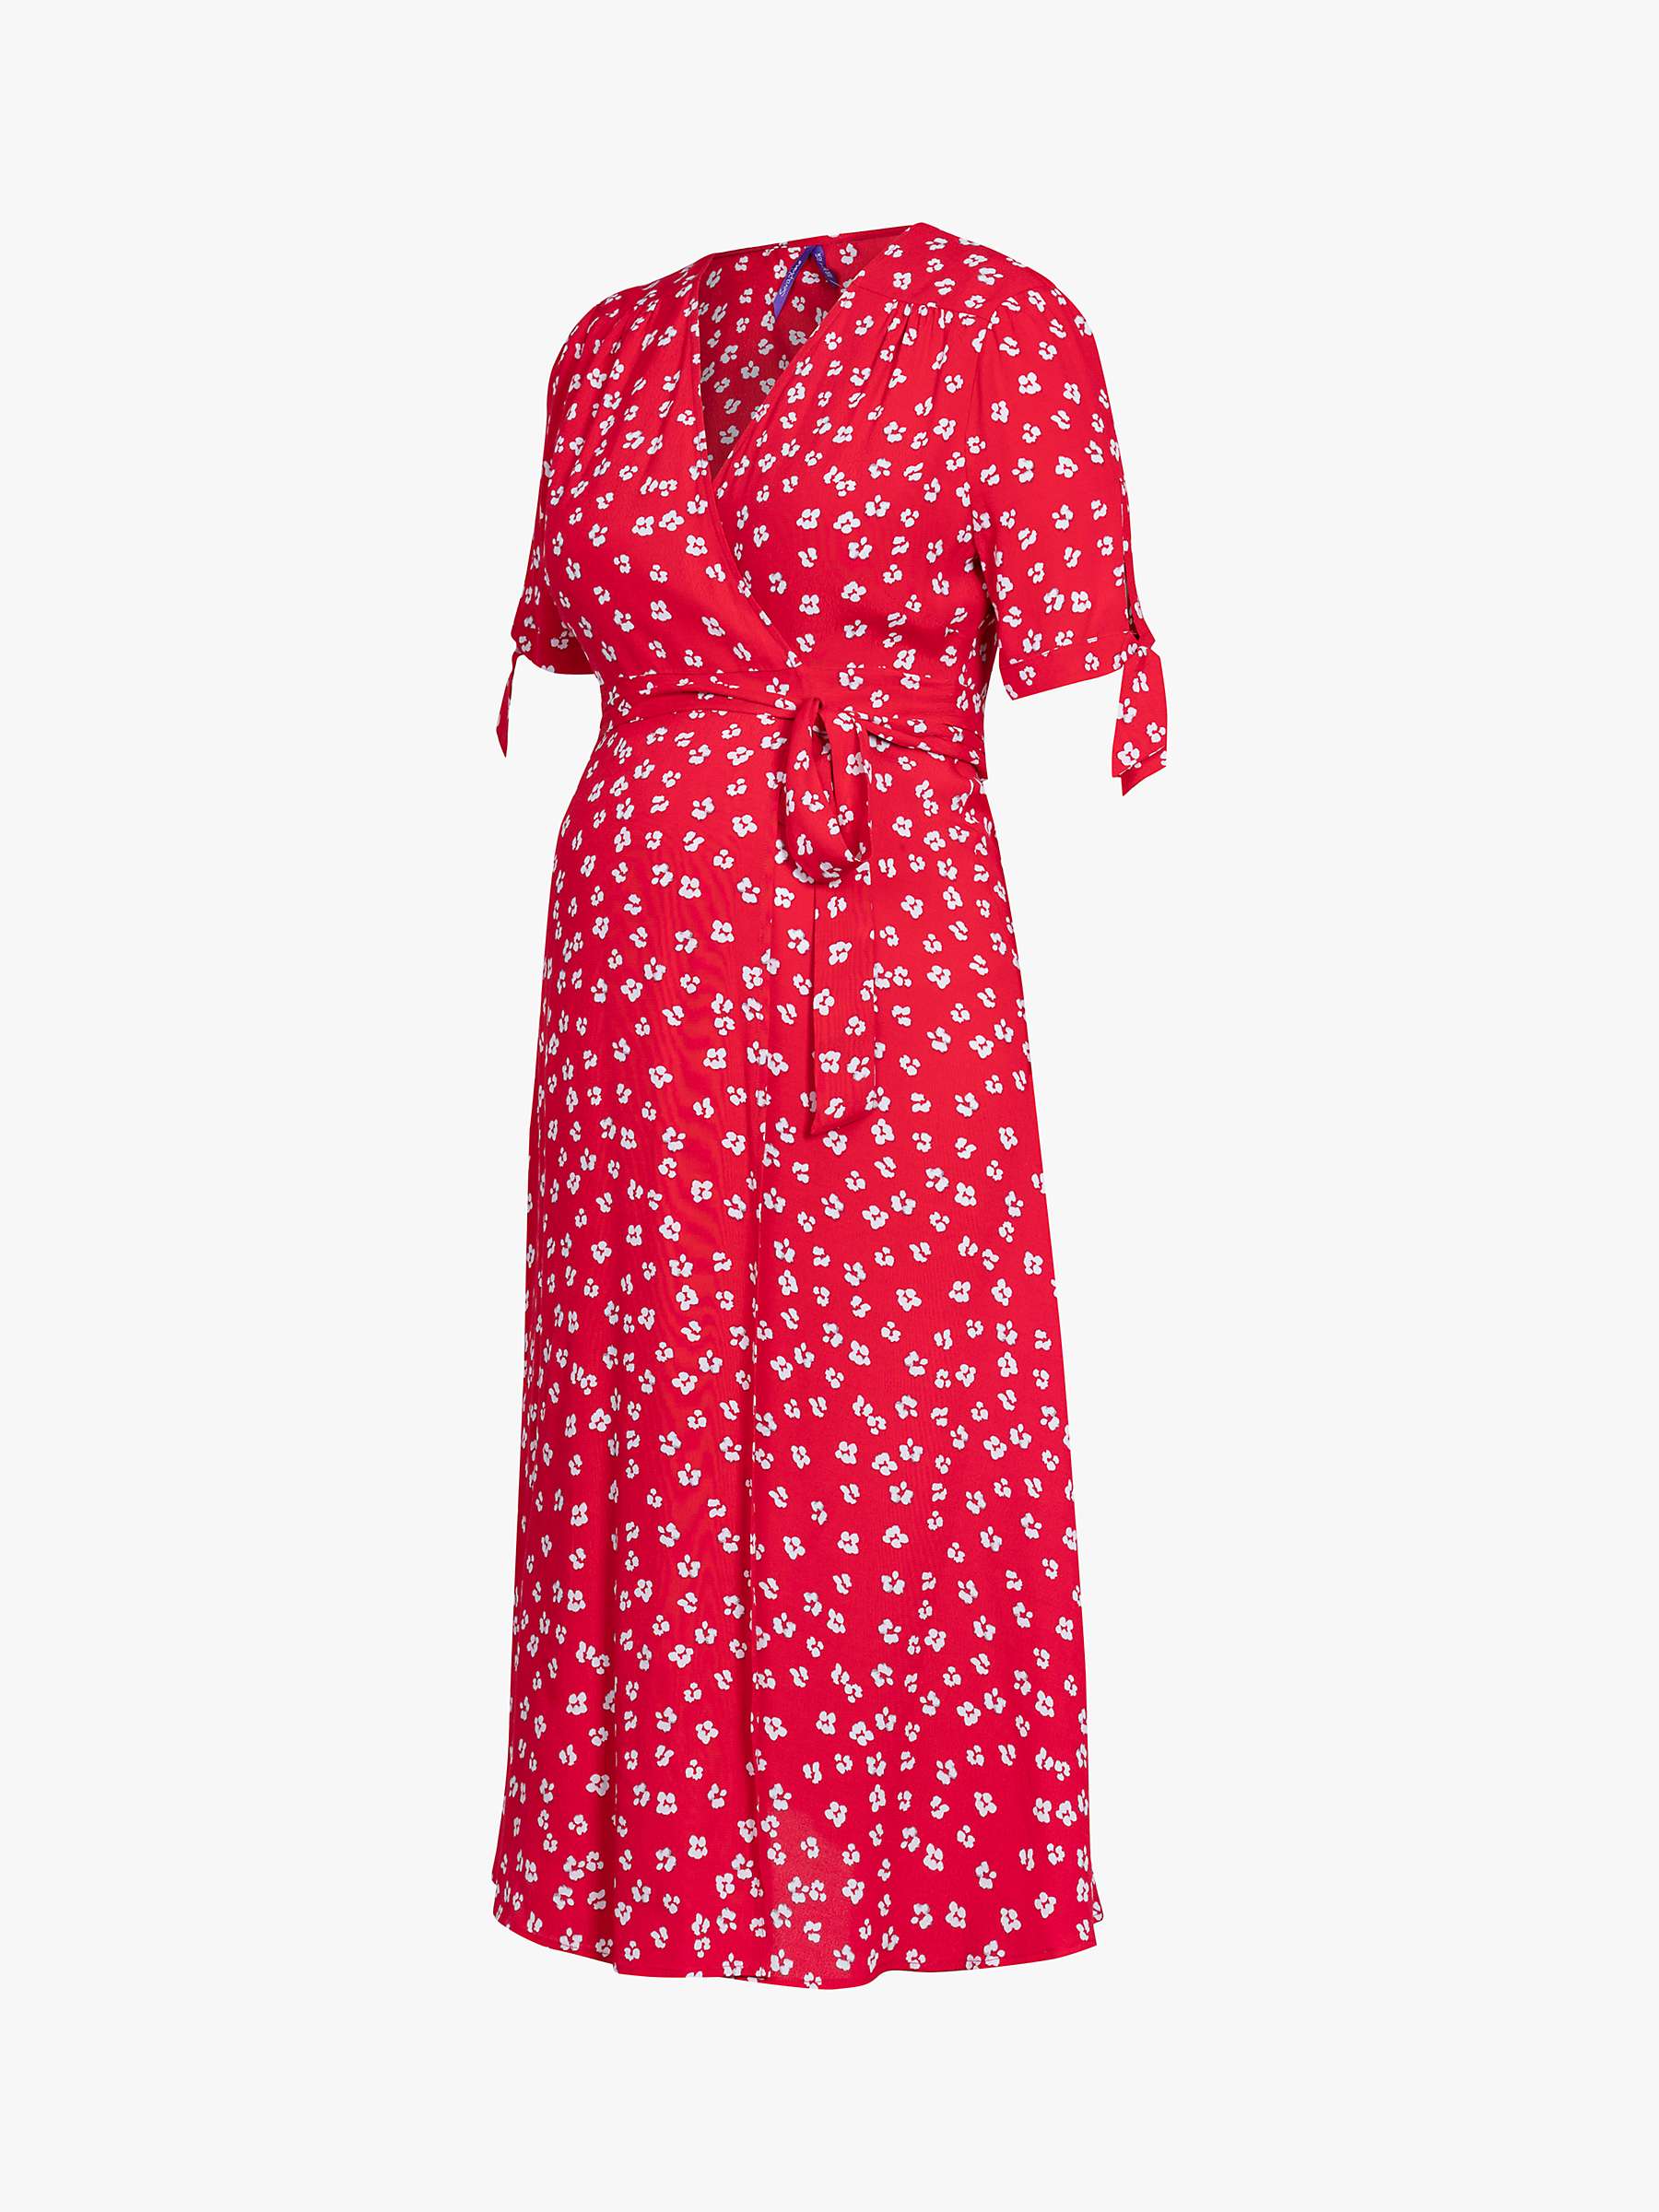 Buy Seraphine Bessie Floral Maternity Dress, Red Online at johnlewis.com